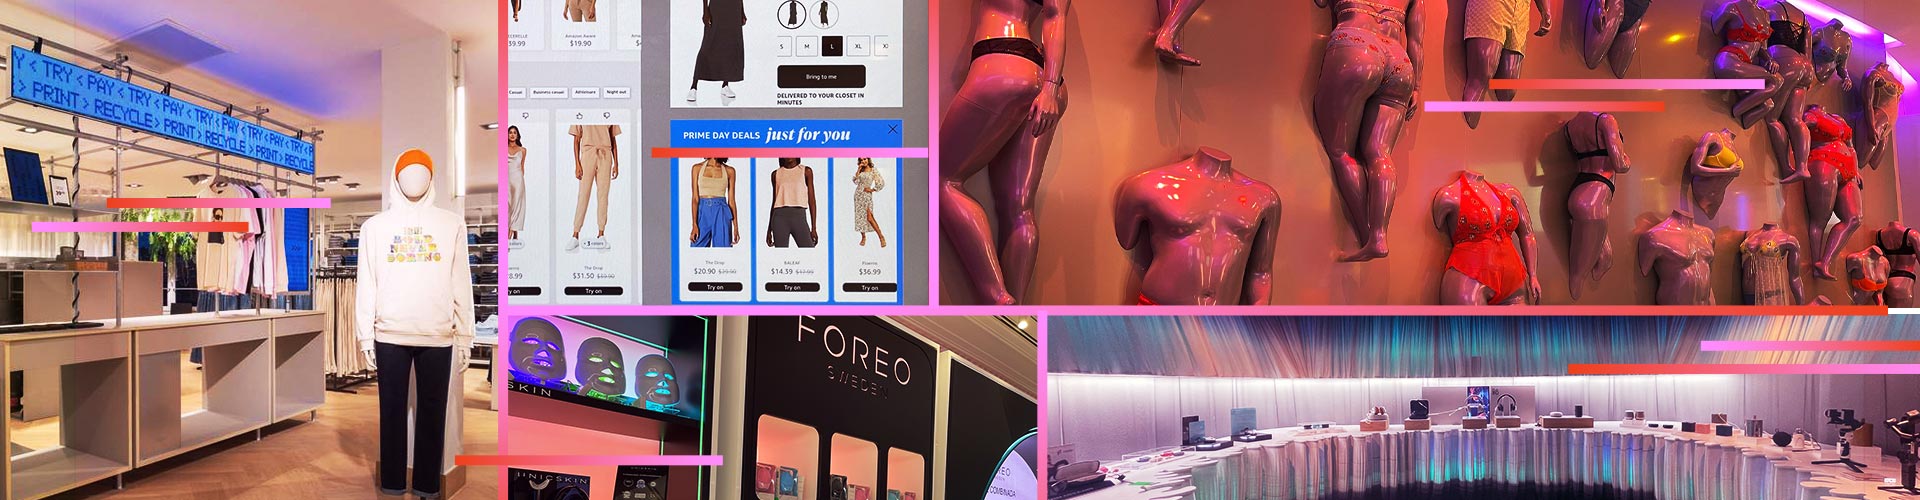 Retail Reimagined, inclusive displays, customizable clothes, curated products thumbnail